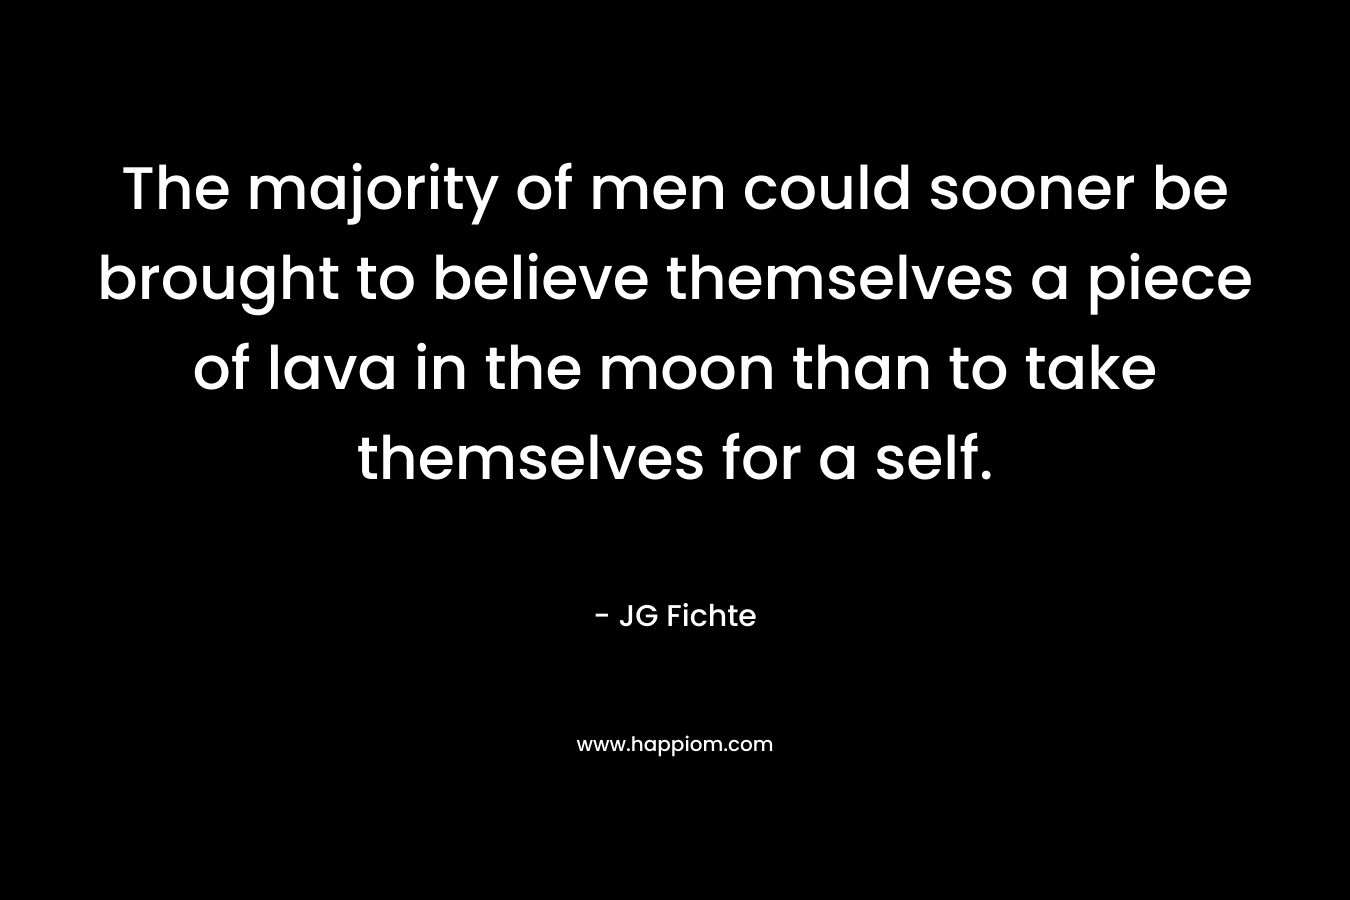 The majority of men could sooner be brought to believe themselves a piece of lava in the moon than to take themselves for a self. – JG Fichte